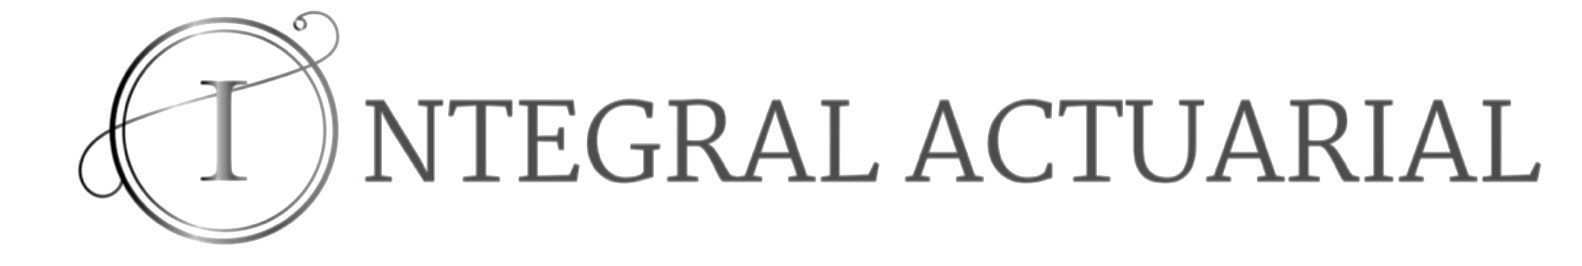 Actuarial and Analytical Executive and Professional Recruitment Agency